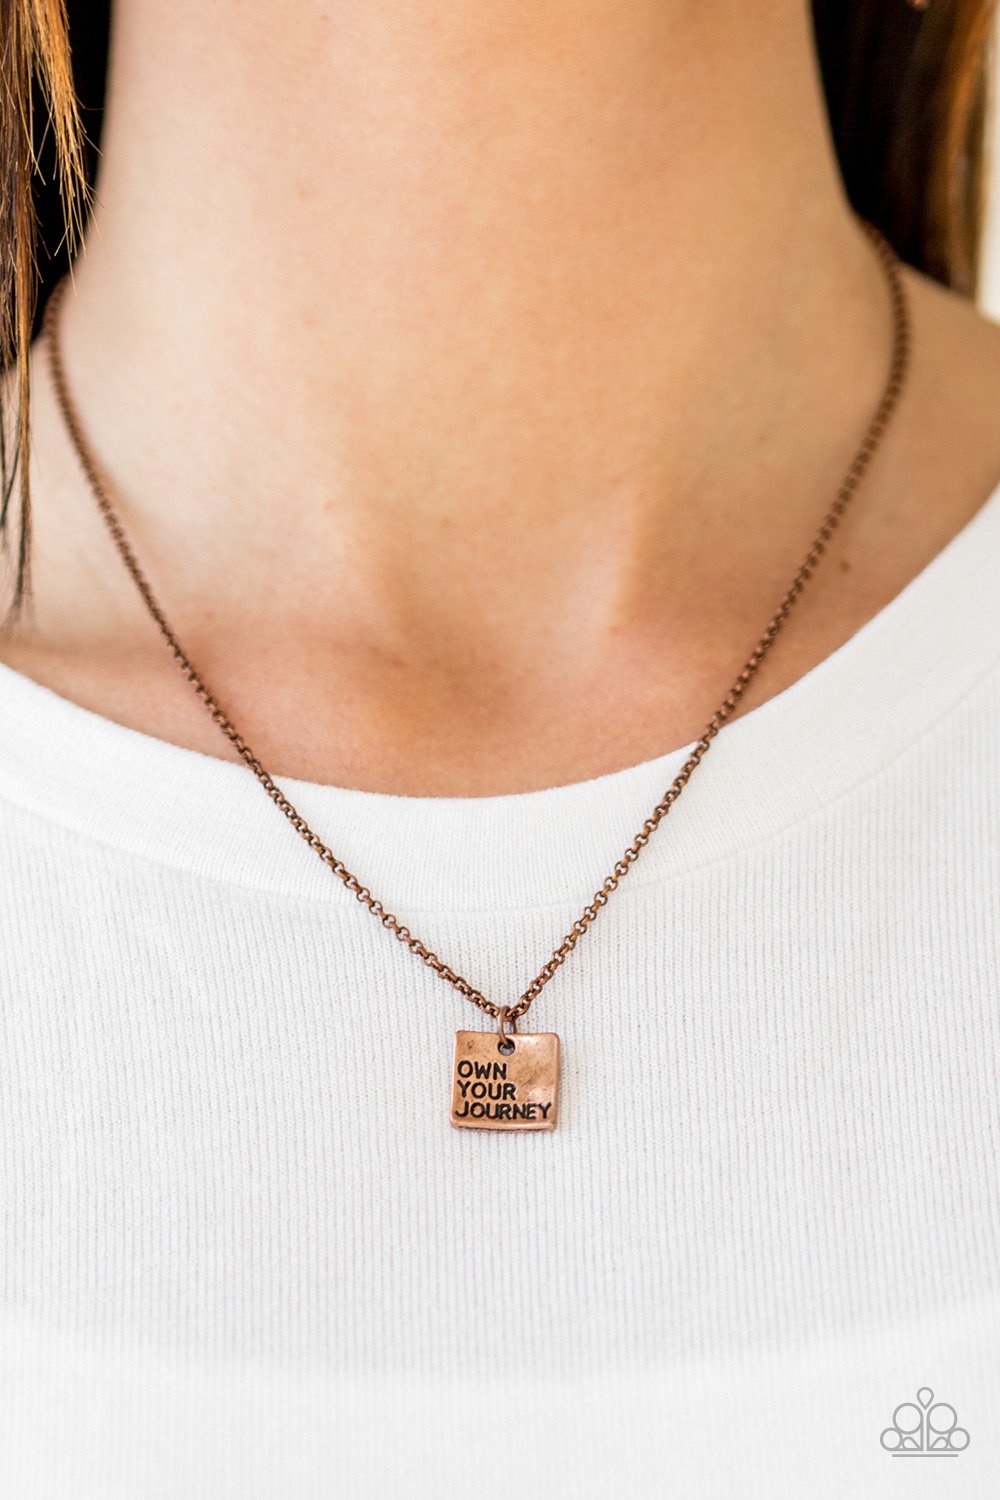 Own Your Own Journey - copper - Paparazzi necklace